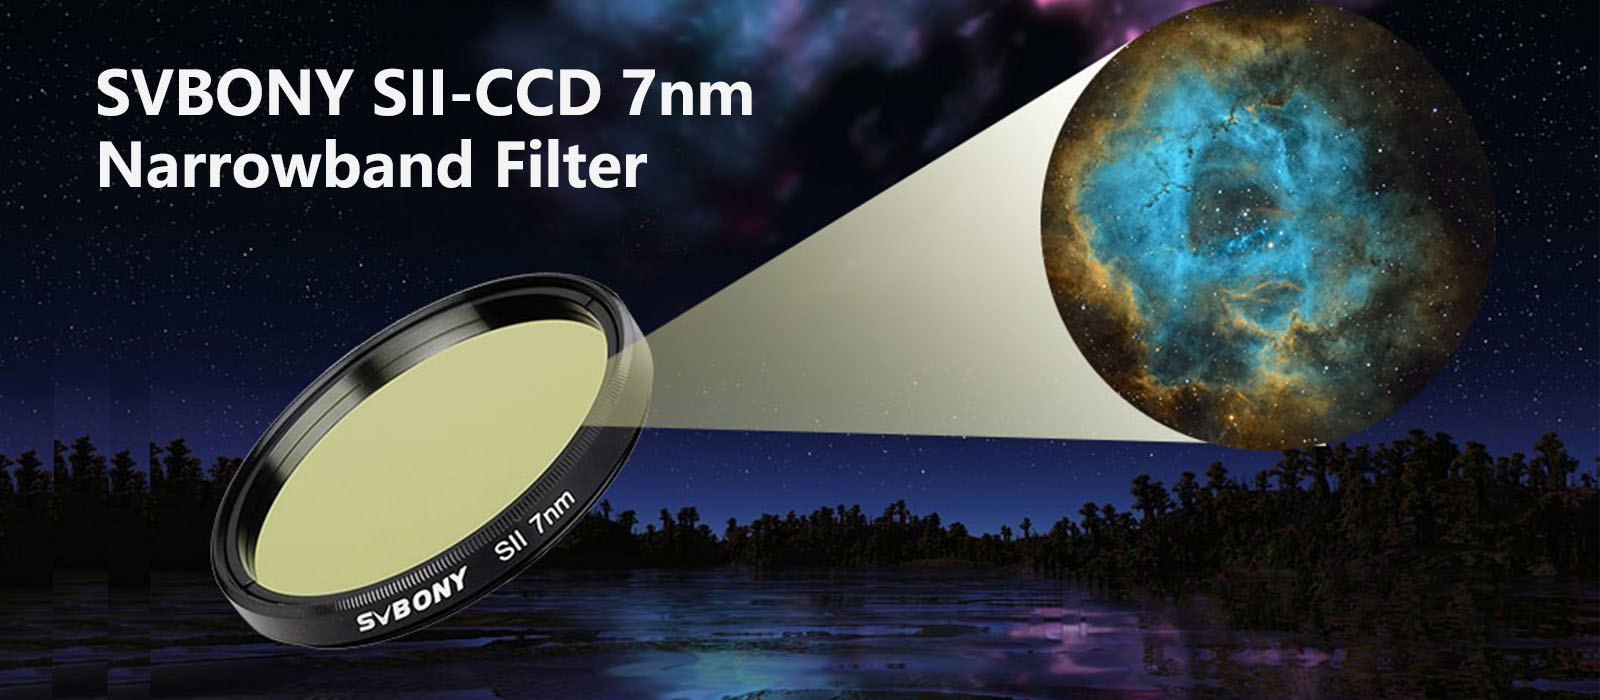 2 Inches SII-CCD 7nm Narrowband Filter.jpg